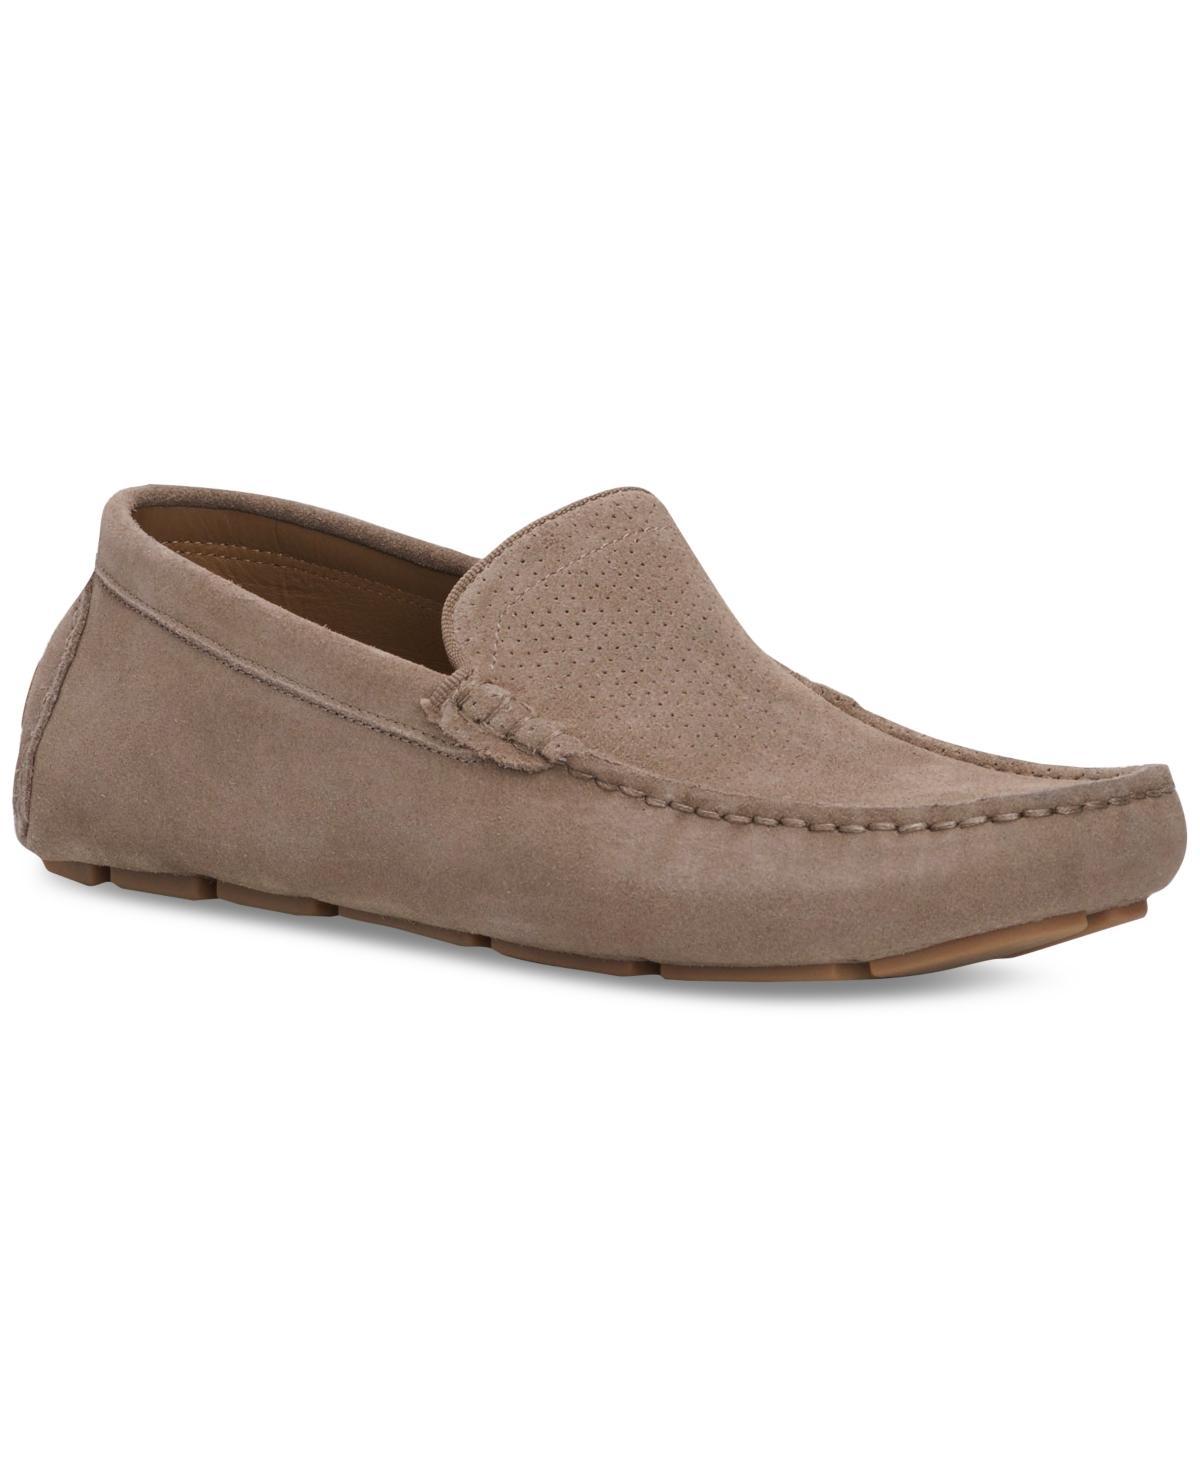 Vince Camuto Eadric Leather Loafer Product Image